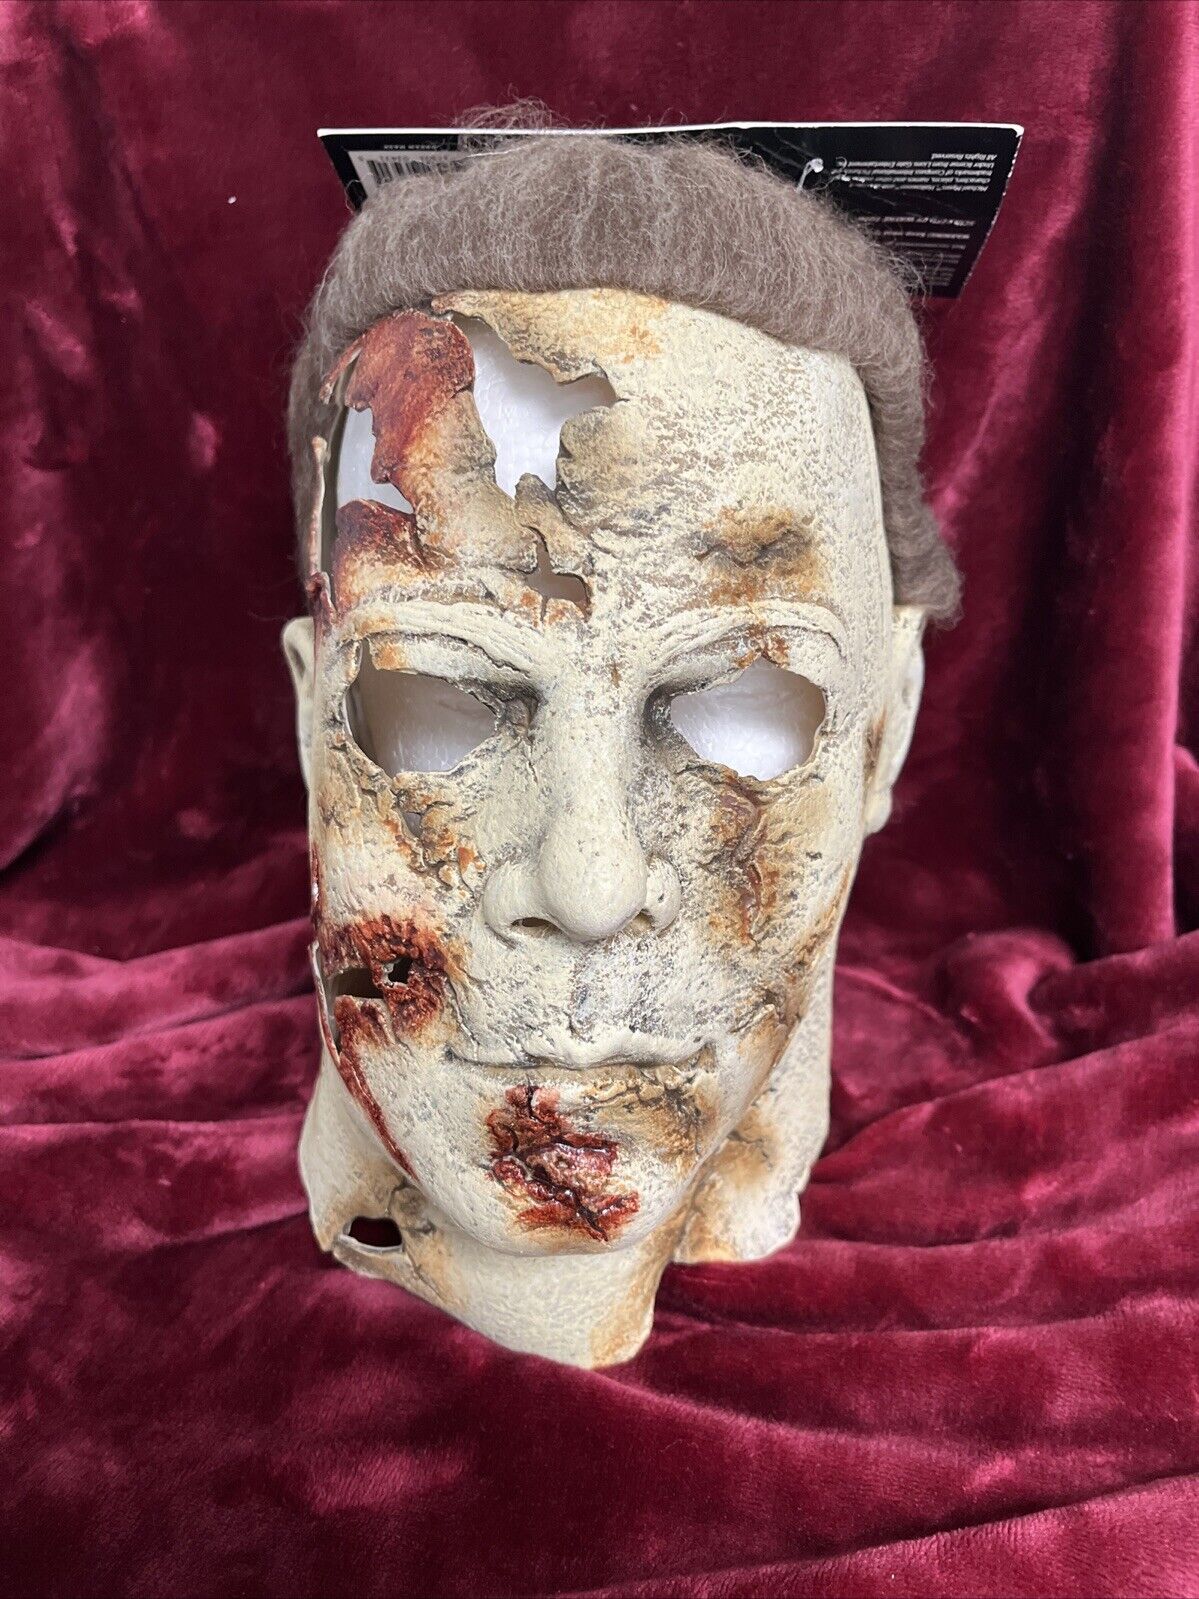 NEW Trick Or Treat Studios Michael Myers Rob Zombie’s Halloween 2 Mask With Tag